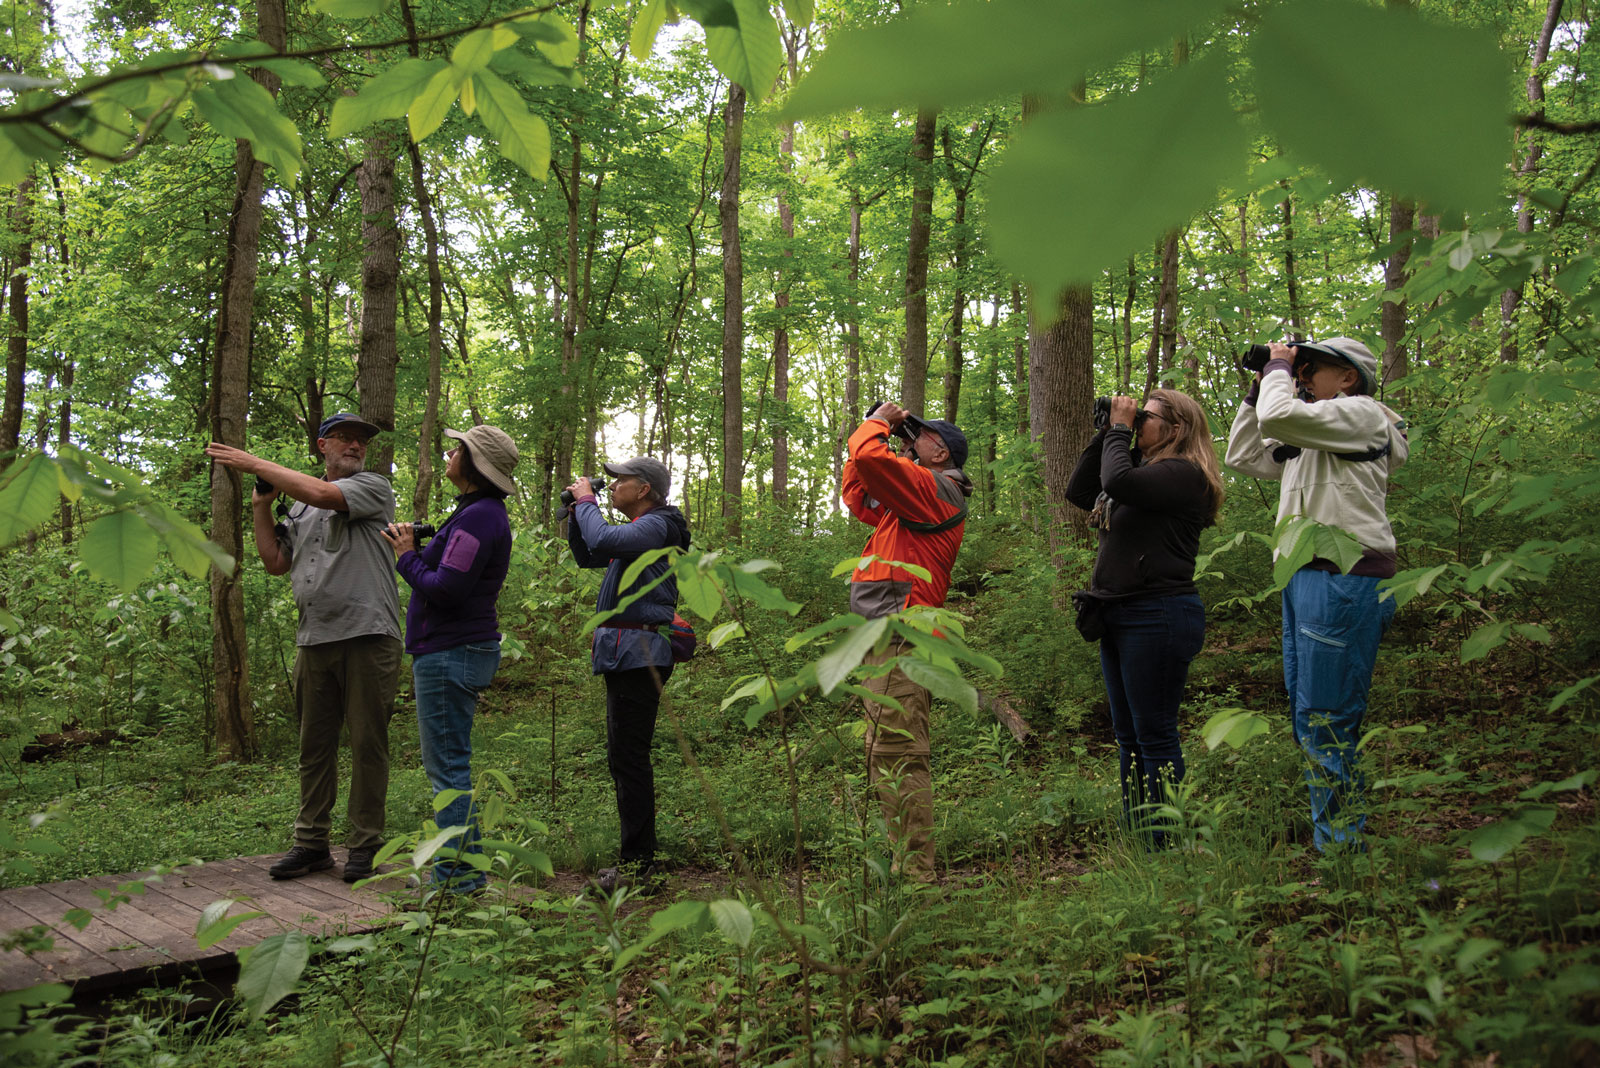 Kiwanis Bird Hike: Group of adults all looking toward the canopy of trees above, some with binoculars surrounded by green foliage. By Steve Bybee